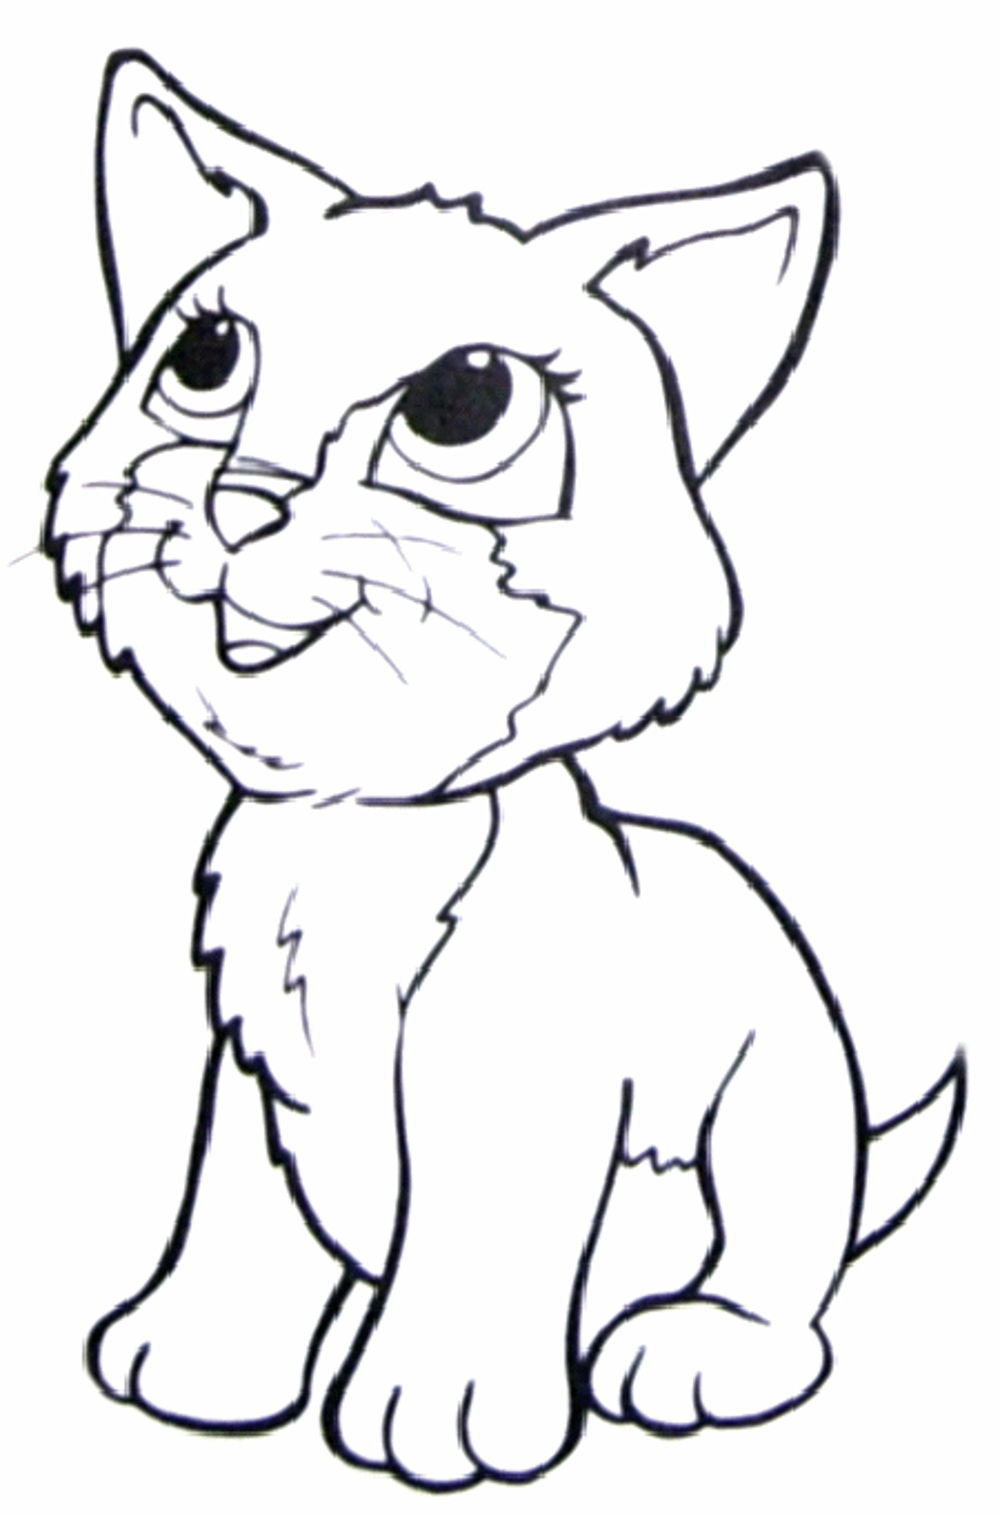 Printable Cat Coloring Pages
 Print & Download The Benefit of Cat Coloring Pages